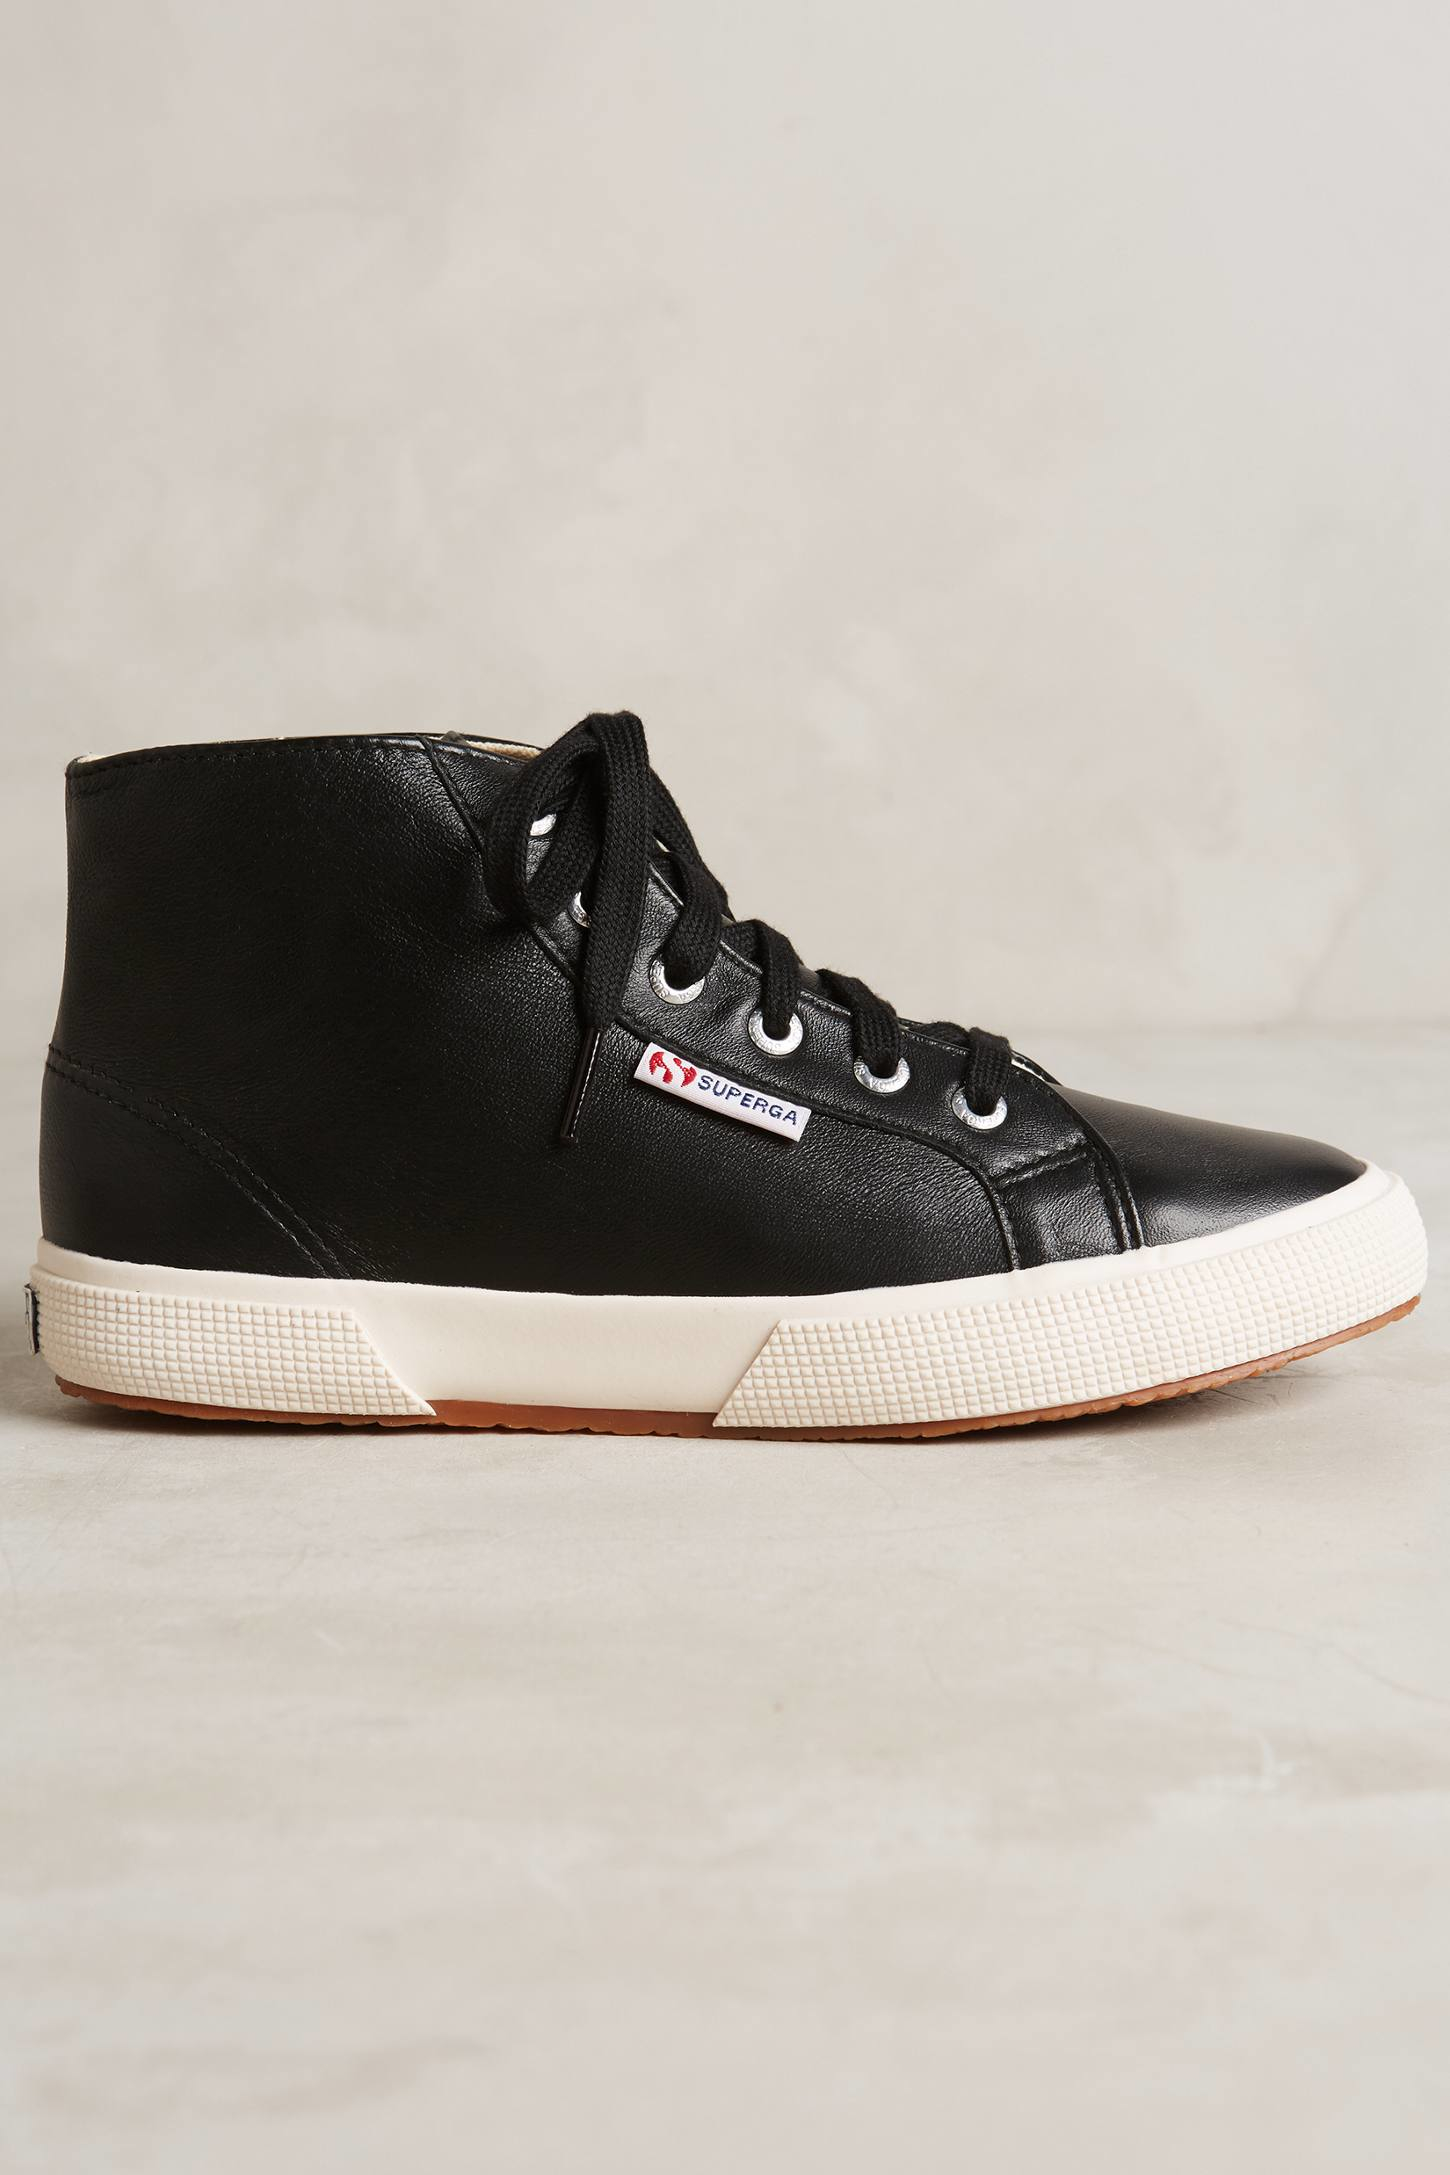 Lyst - Superga Leather High-top Sneakers in Black